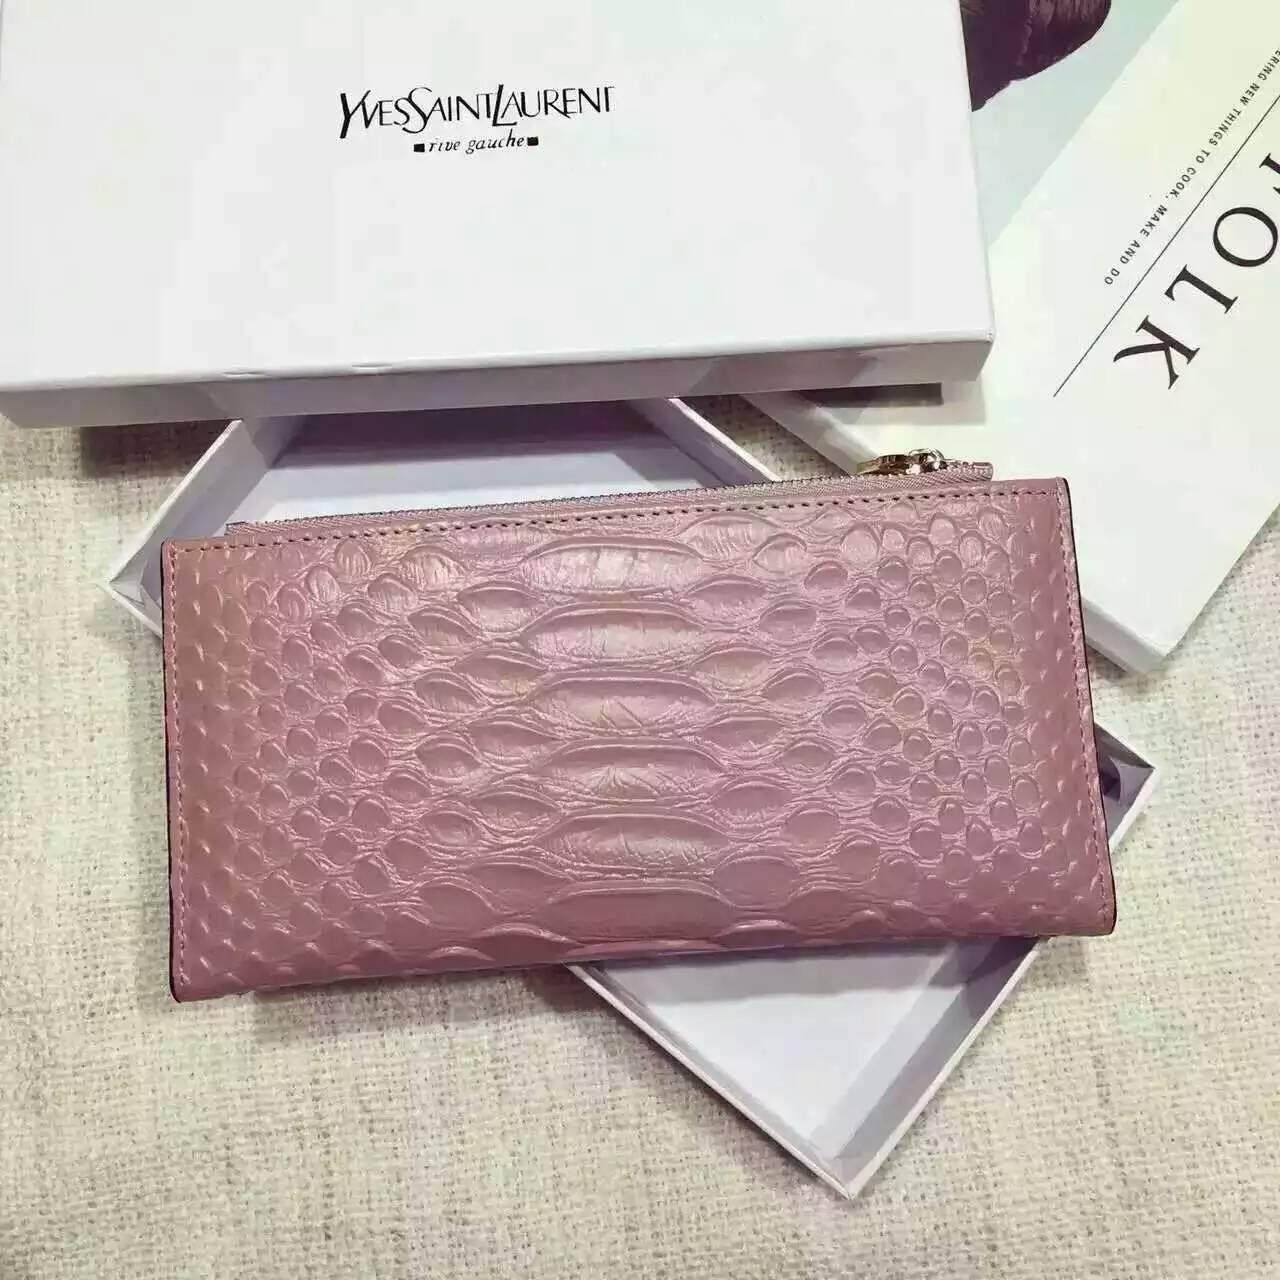 Limited Edition!2016 New Saint Laurent Small Leather Goods Cheap Sale-Saint Laurent Zippy Wallet in Pink Python Embossed Leather - Click Image to Close